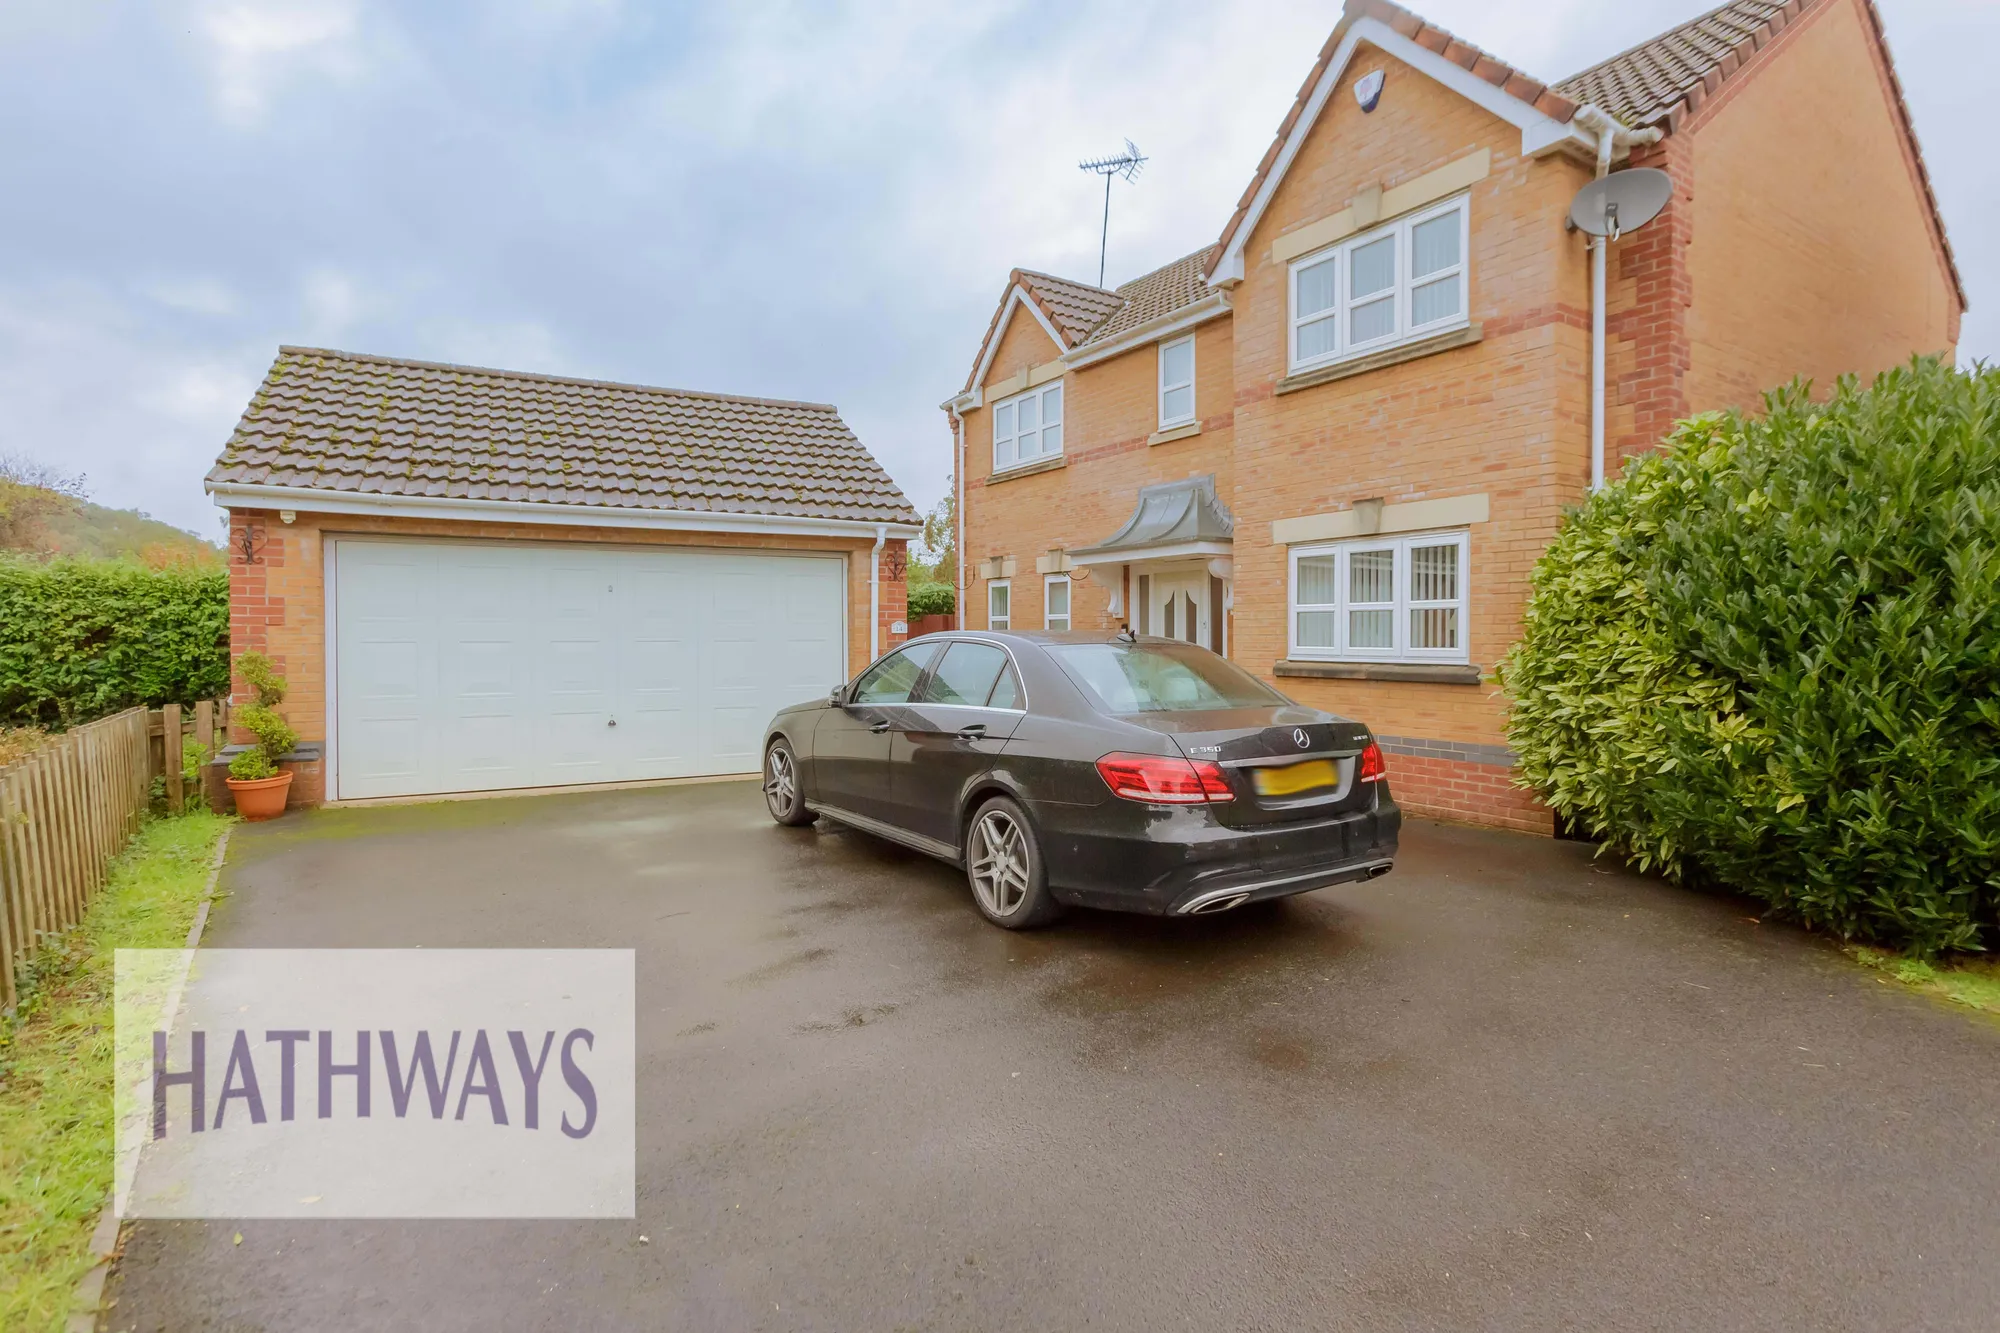 4 bed detached house for sale in Stockwood View, Newport - Property Image 1